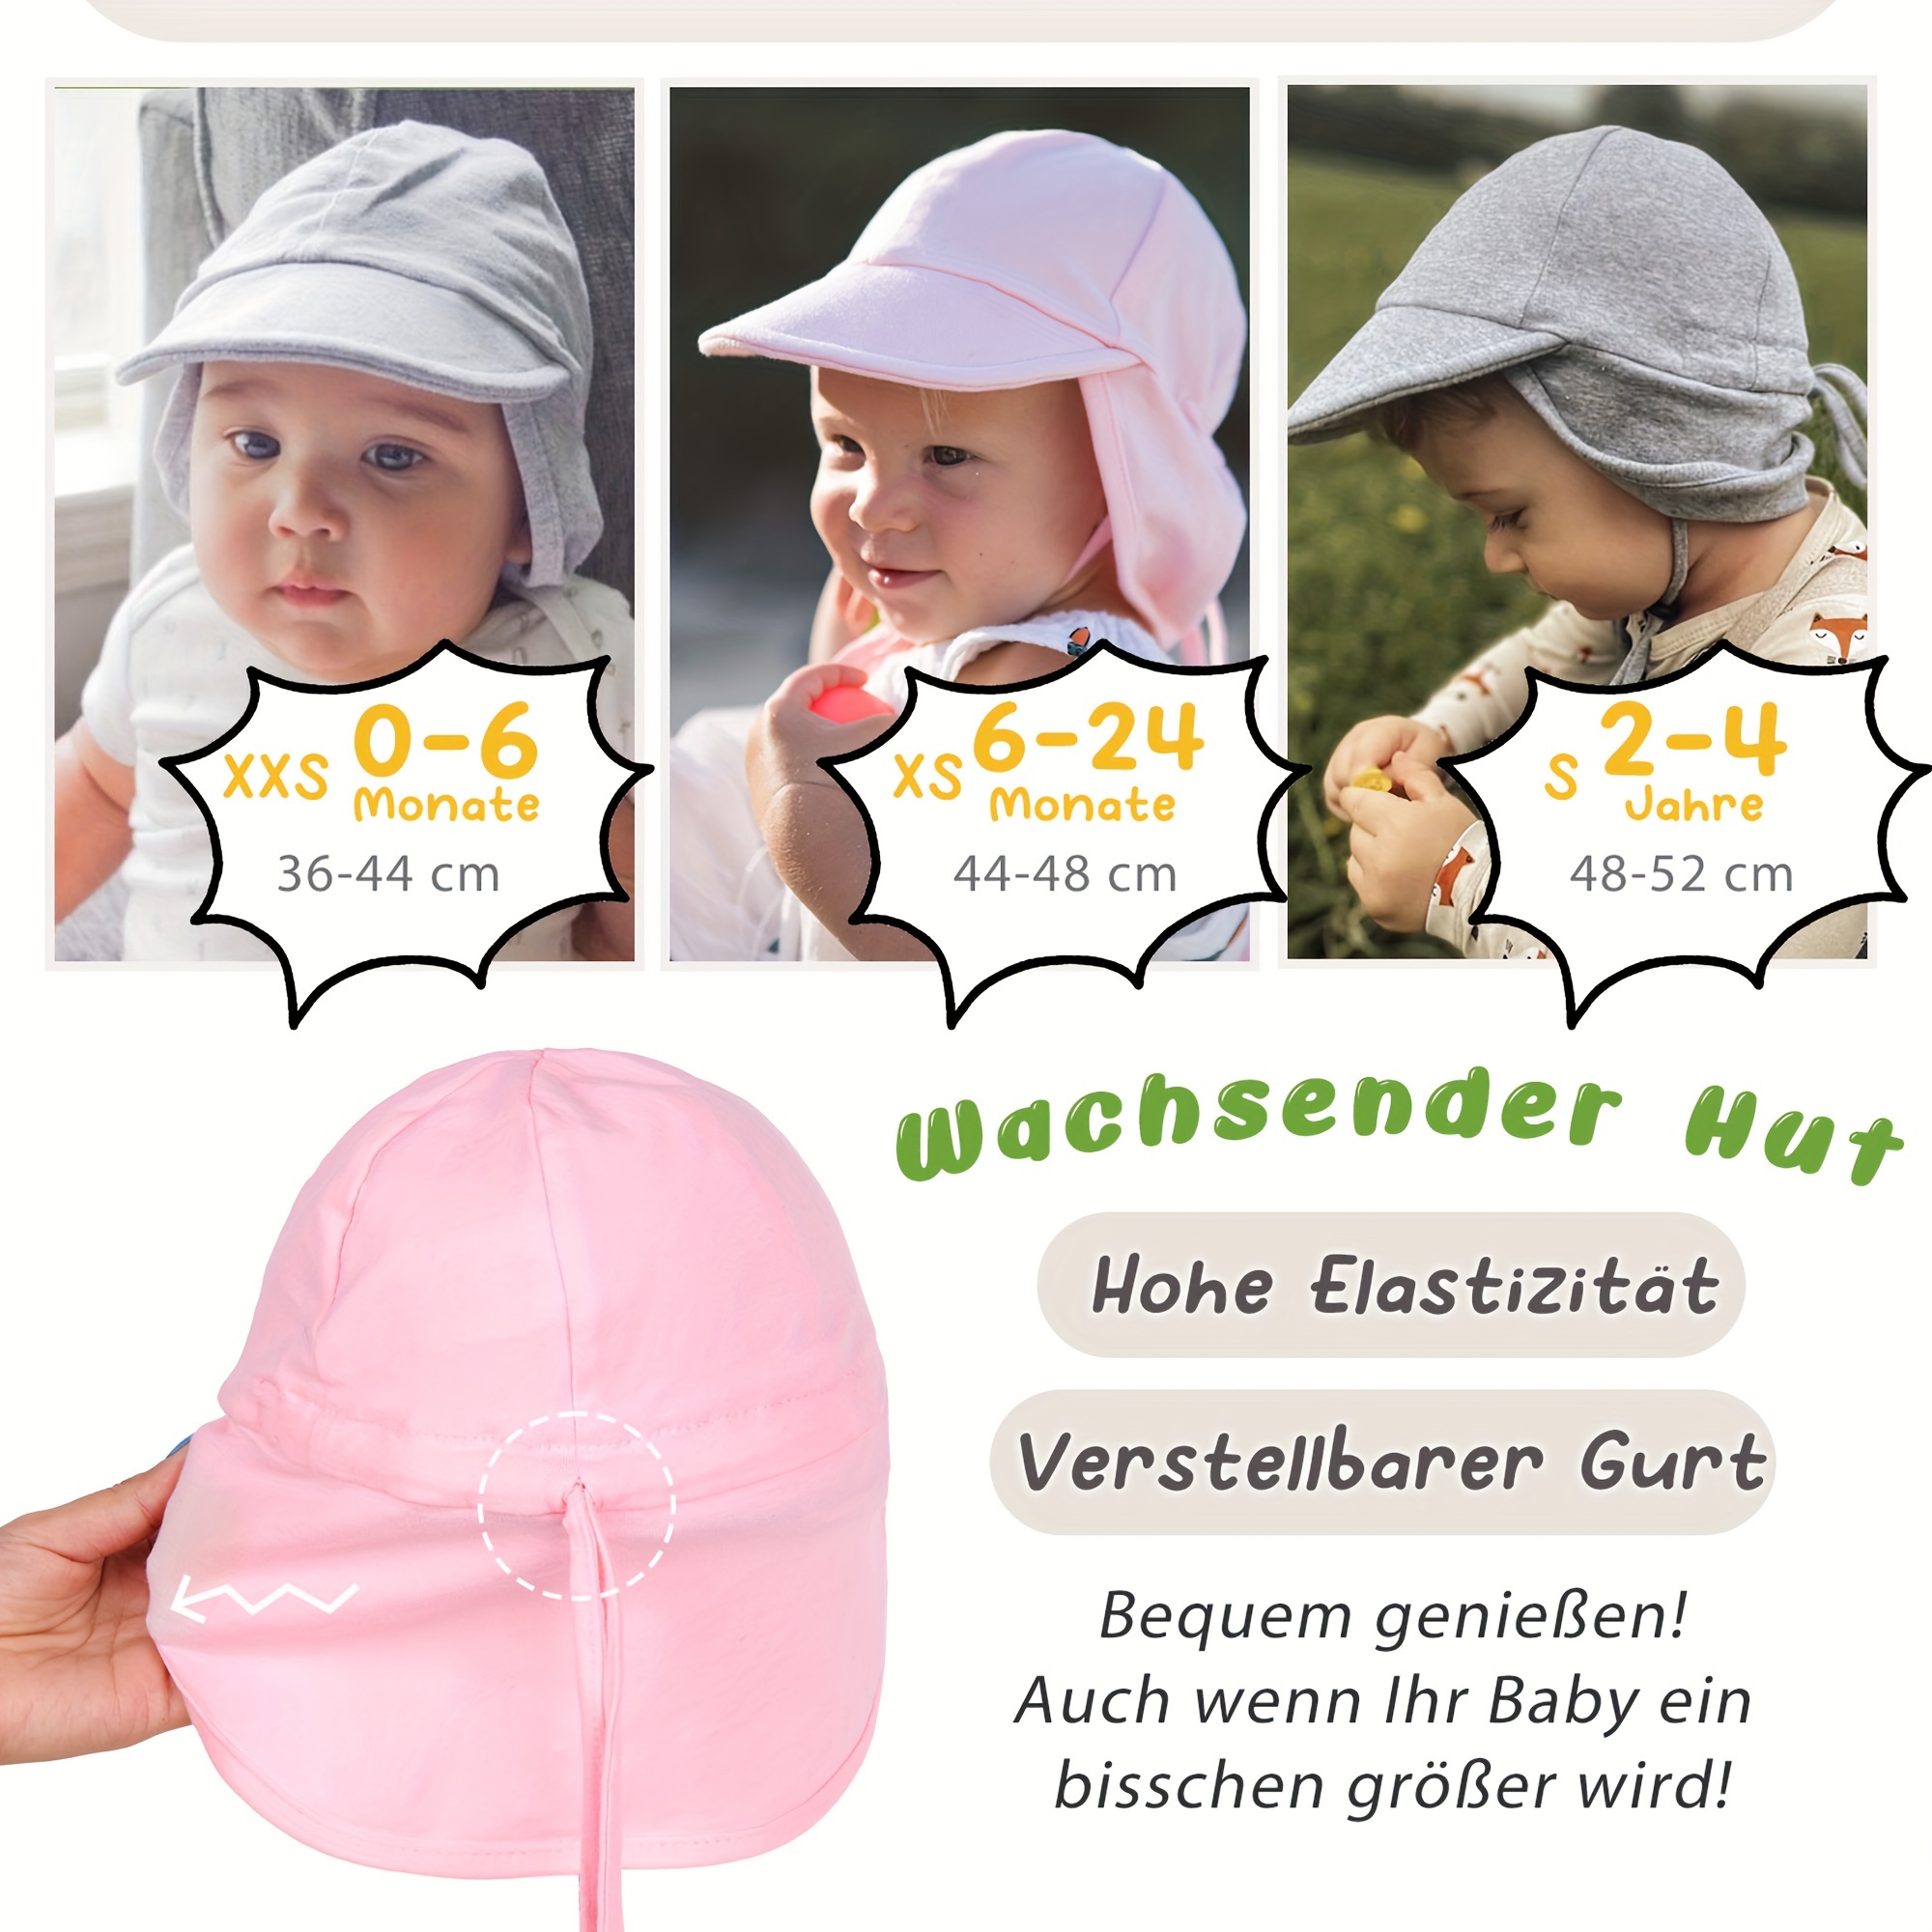 Sun and heat protection for babies and kids